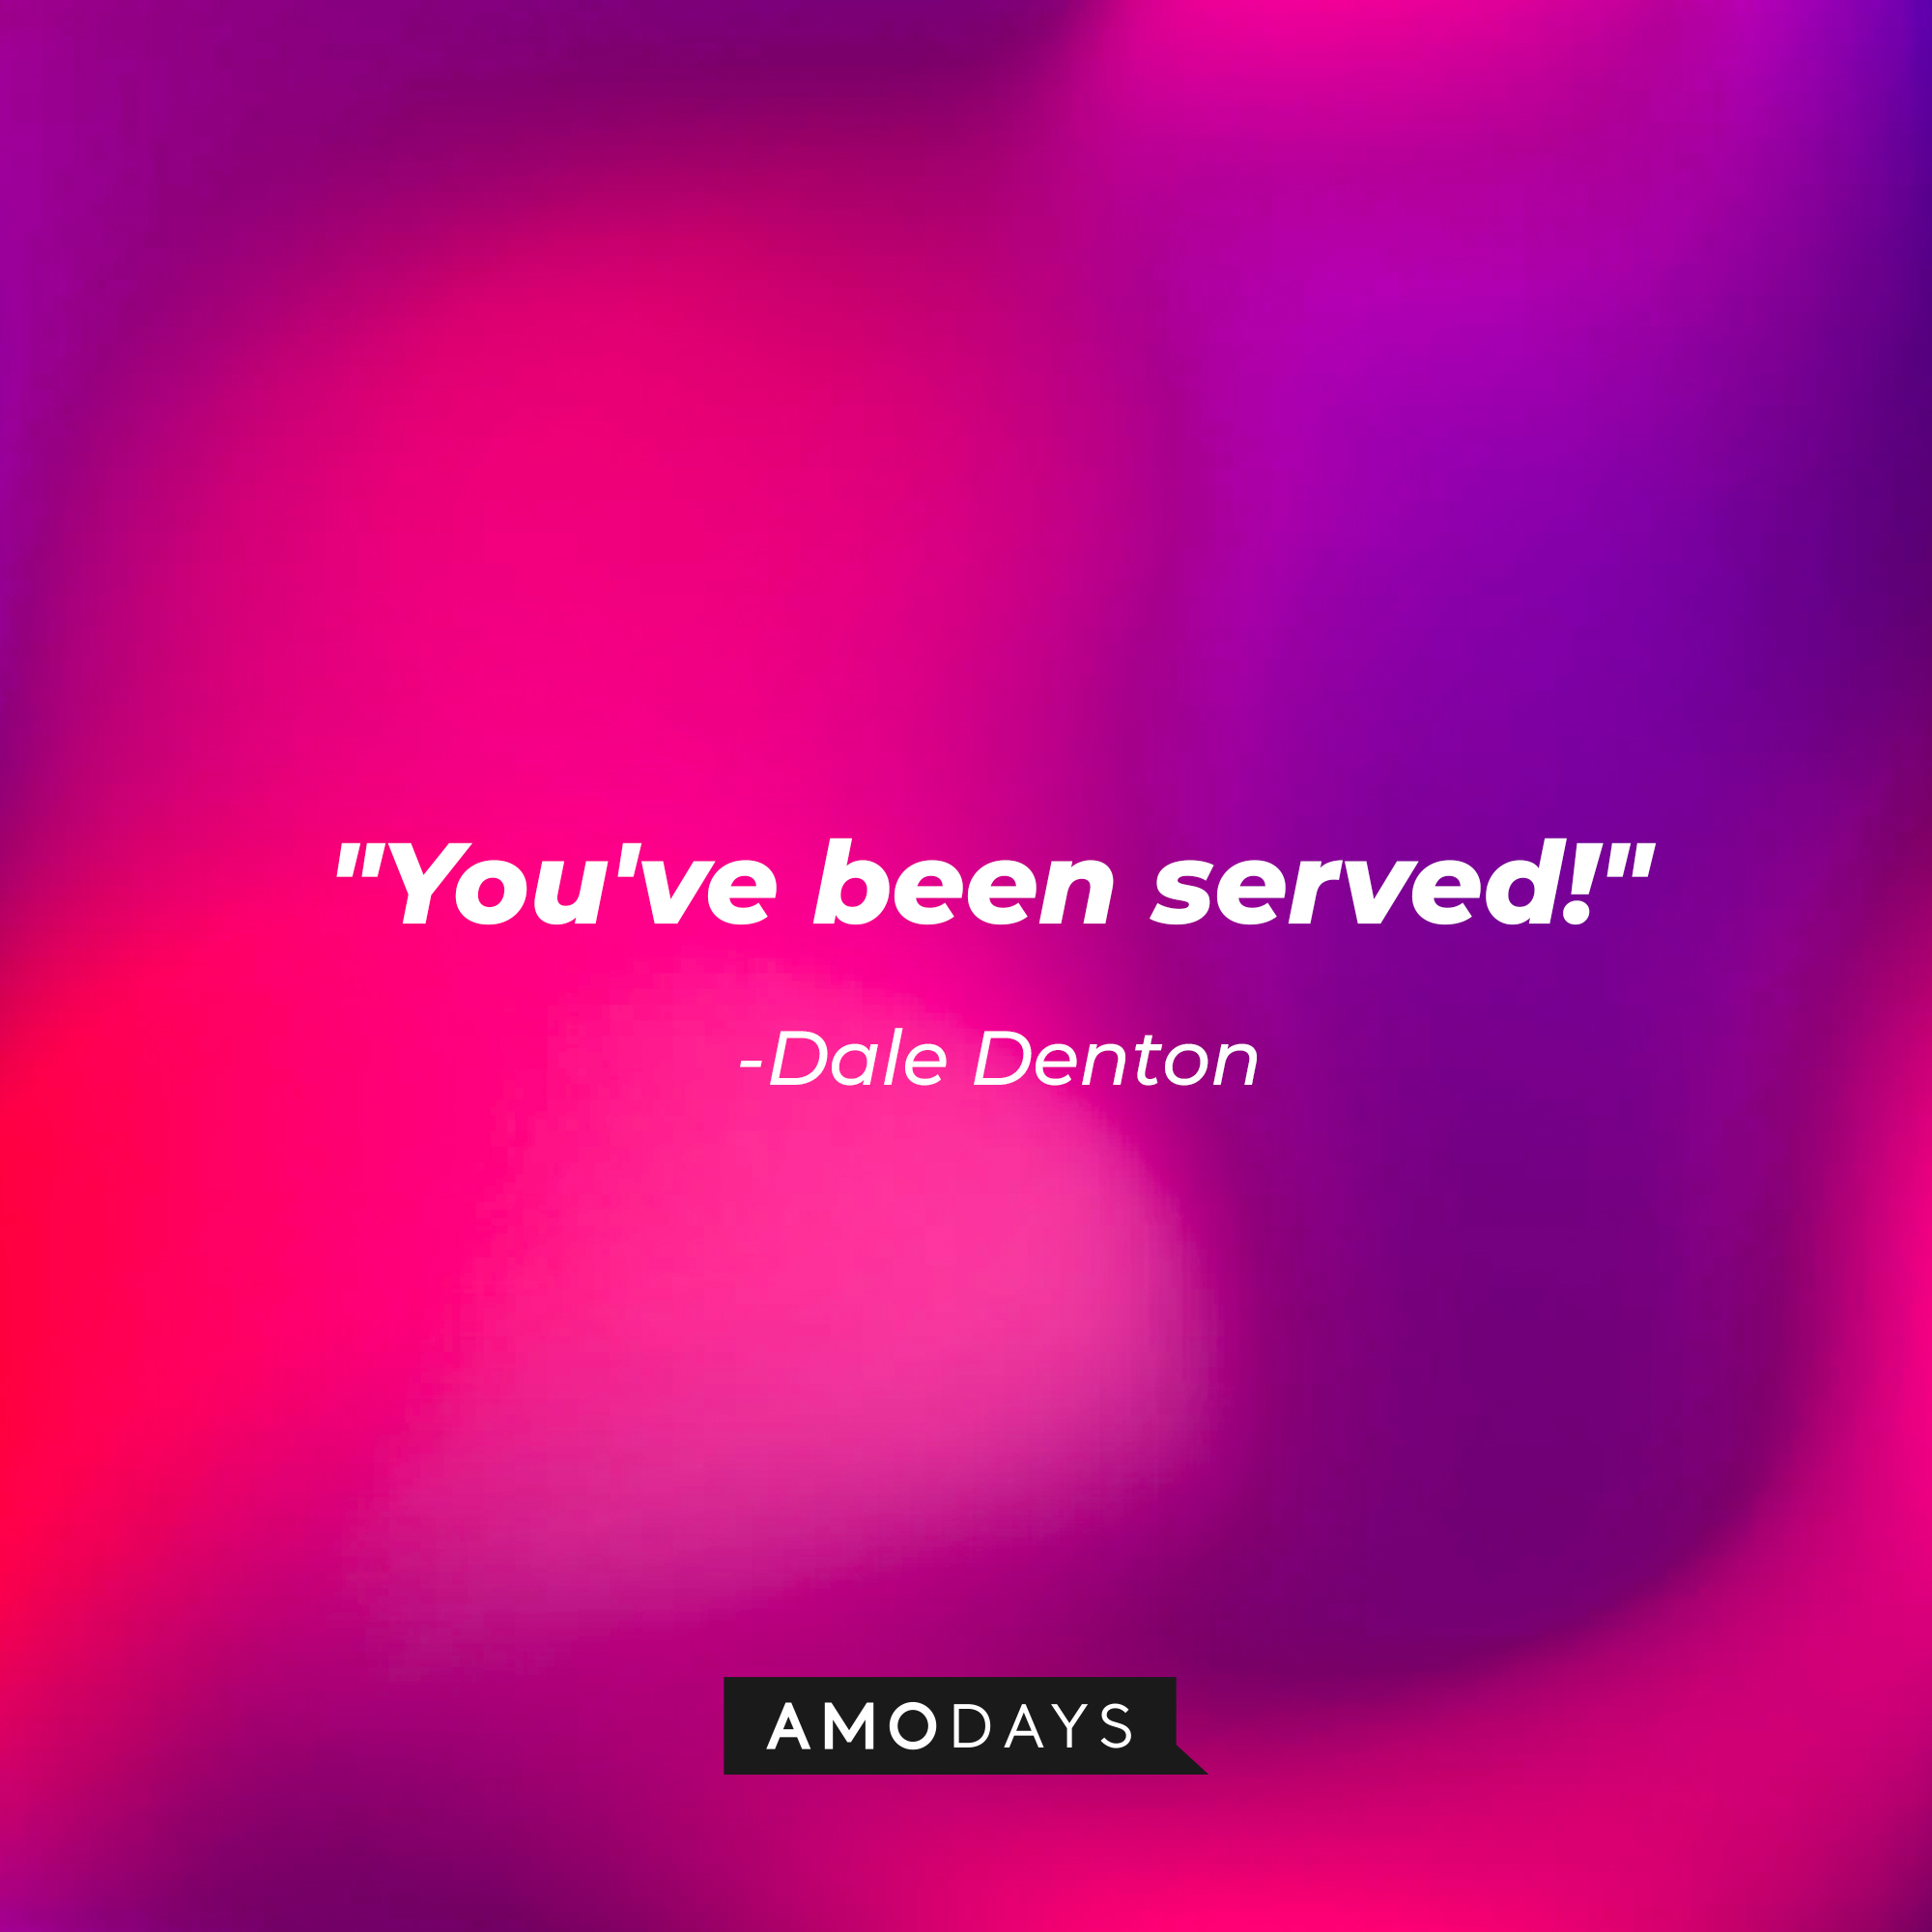 Dale Denton's quote: "You've been served!" | Source: AmoDays